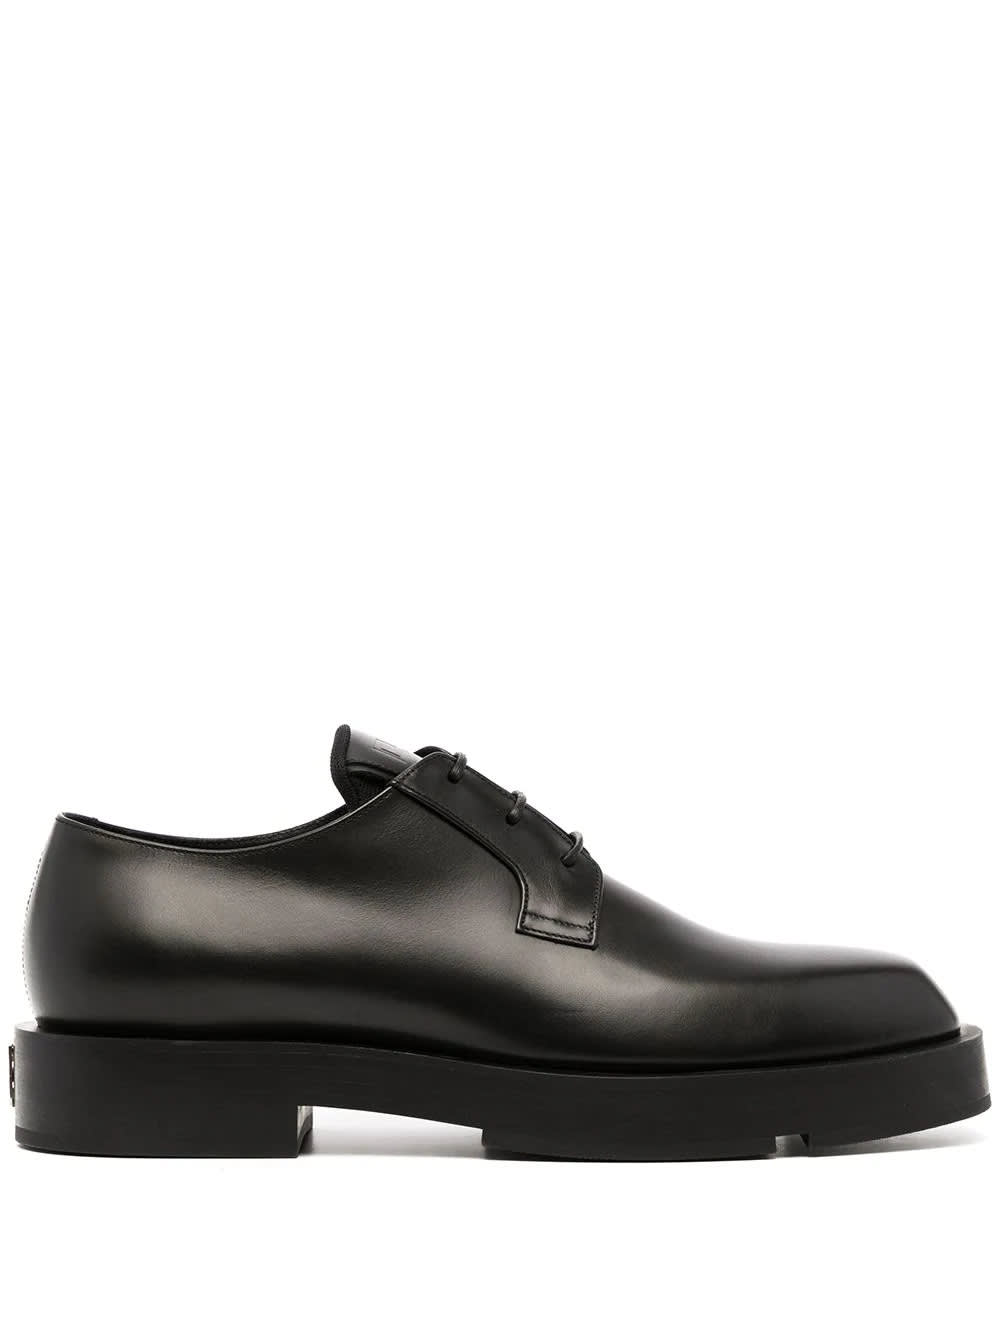 Givenchy Man Squared Derby Shoe In Black Box Leather